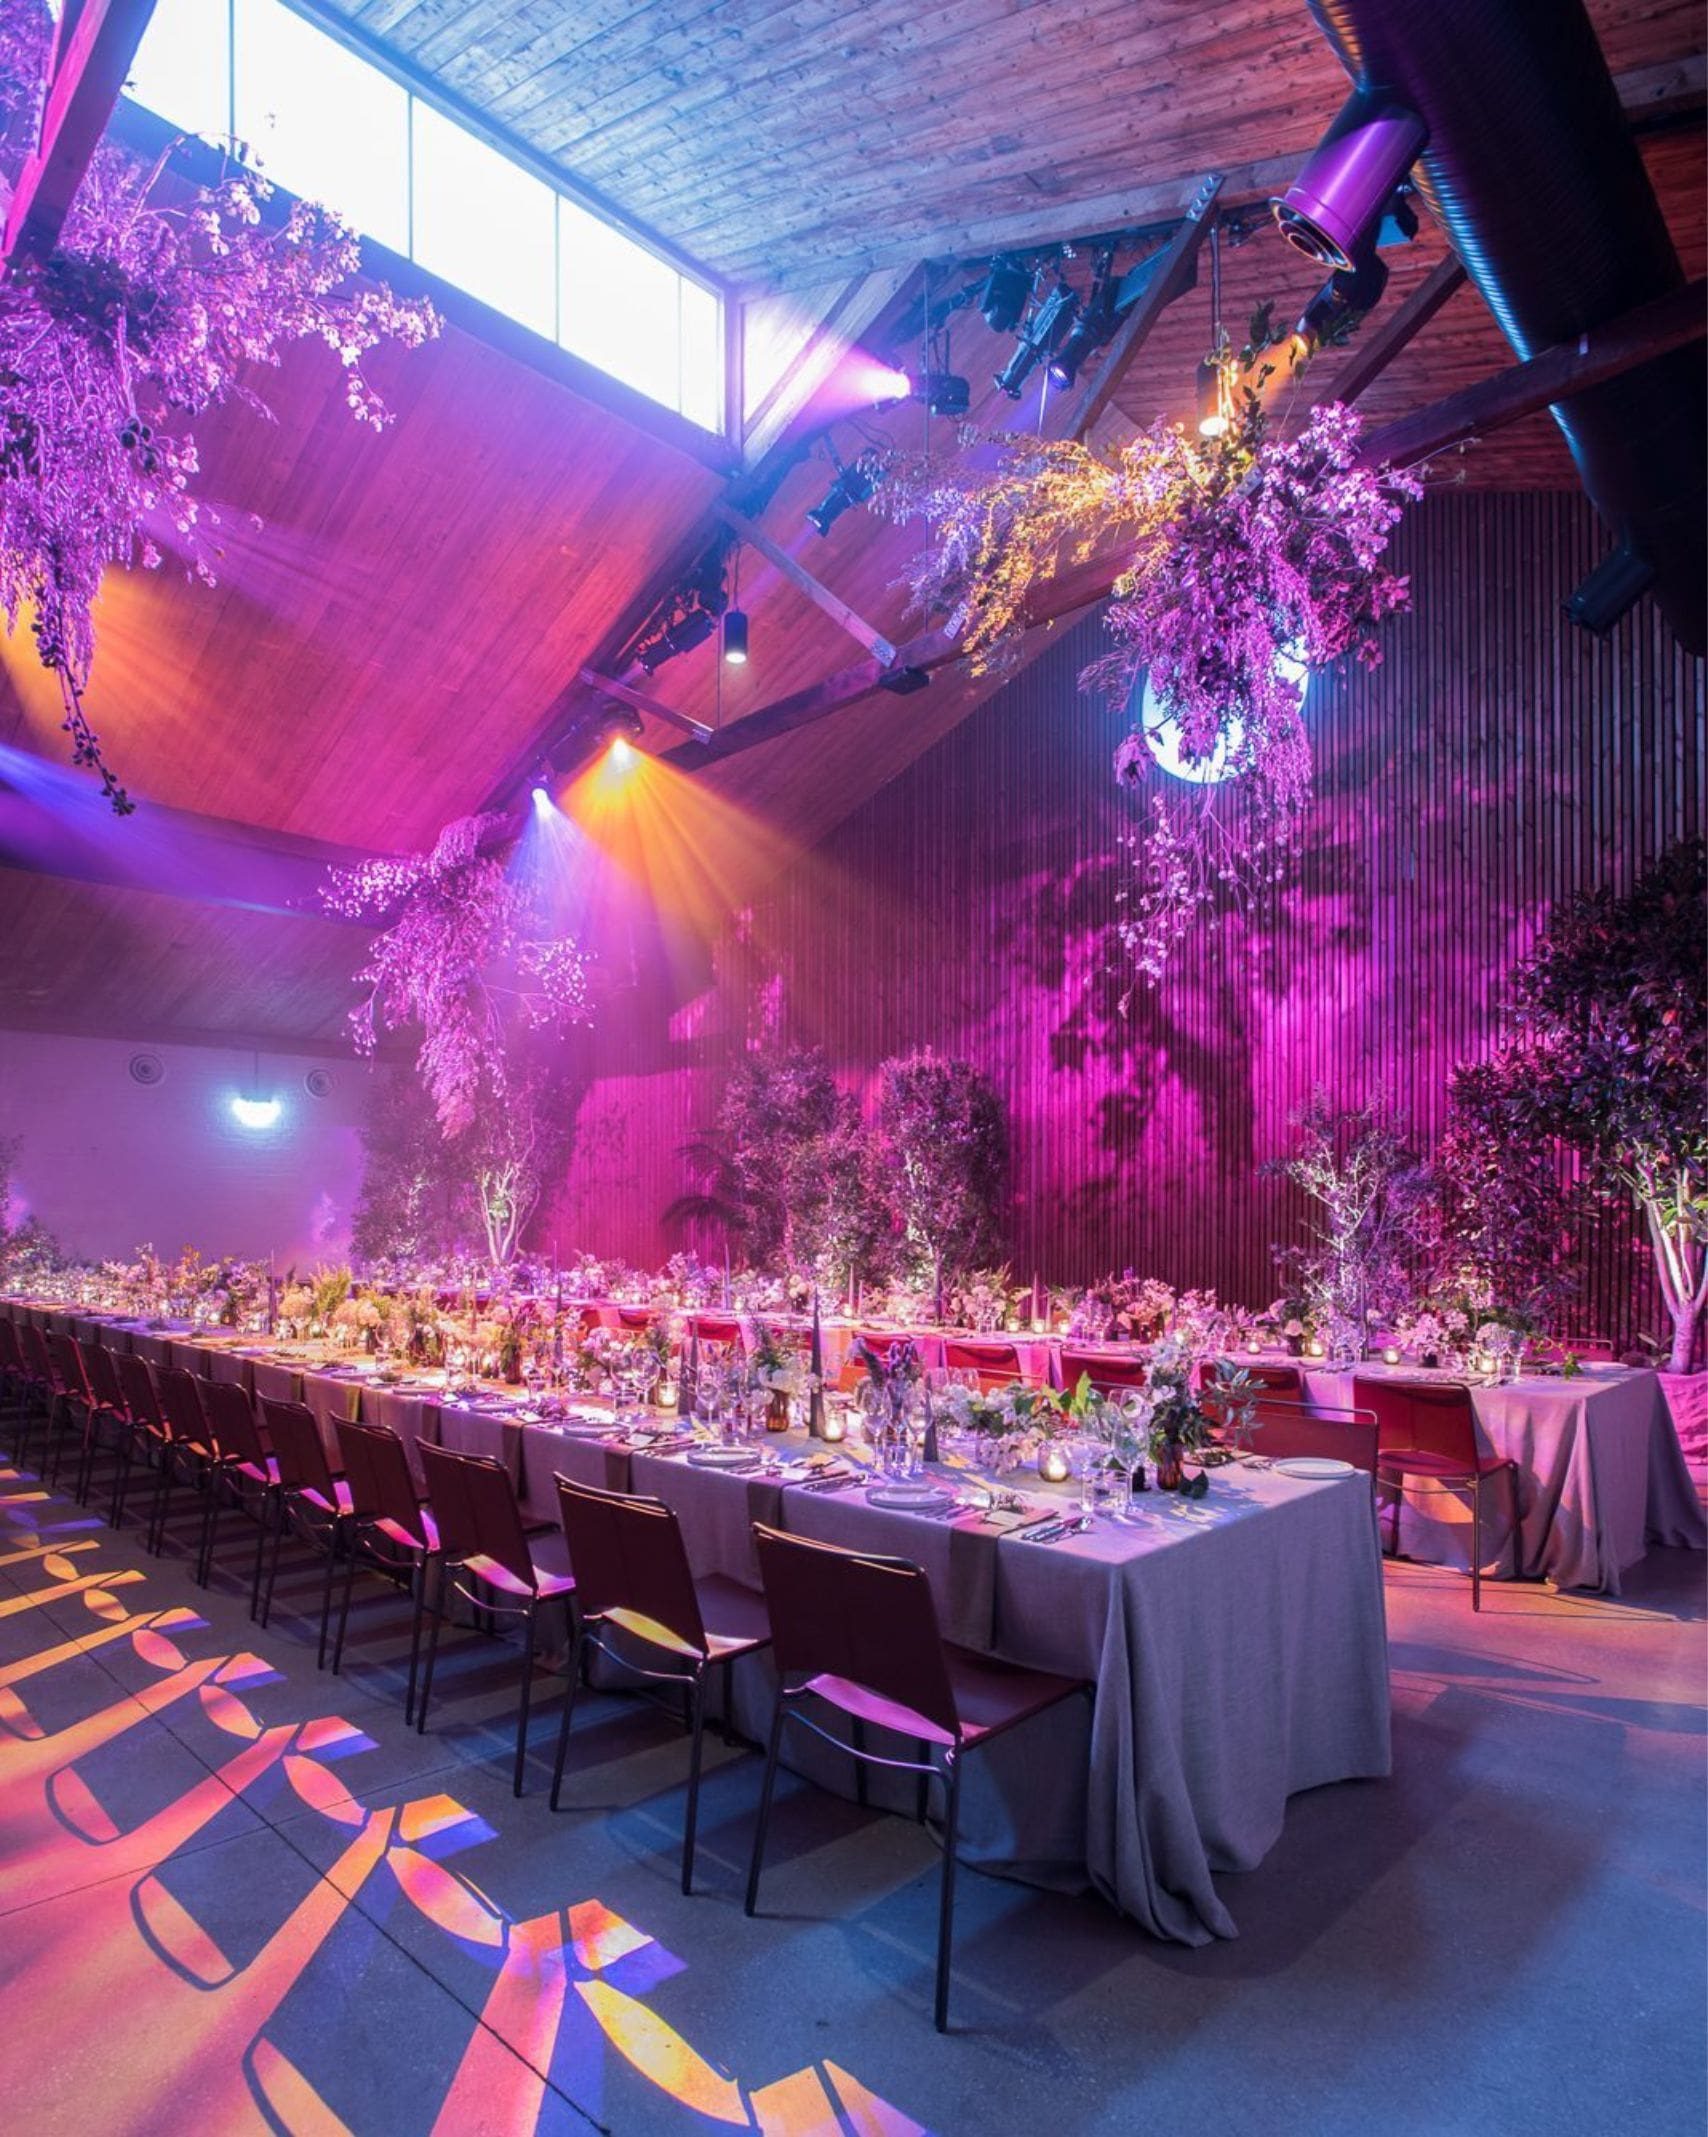 Half Acre Melbourne Venue: A vibrant and lively party event, where guests come together to celebrate and create unforgettable memories in this dynamic and stylish setting